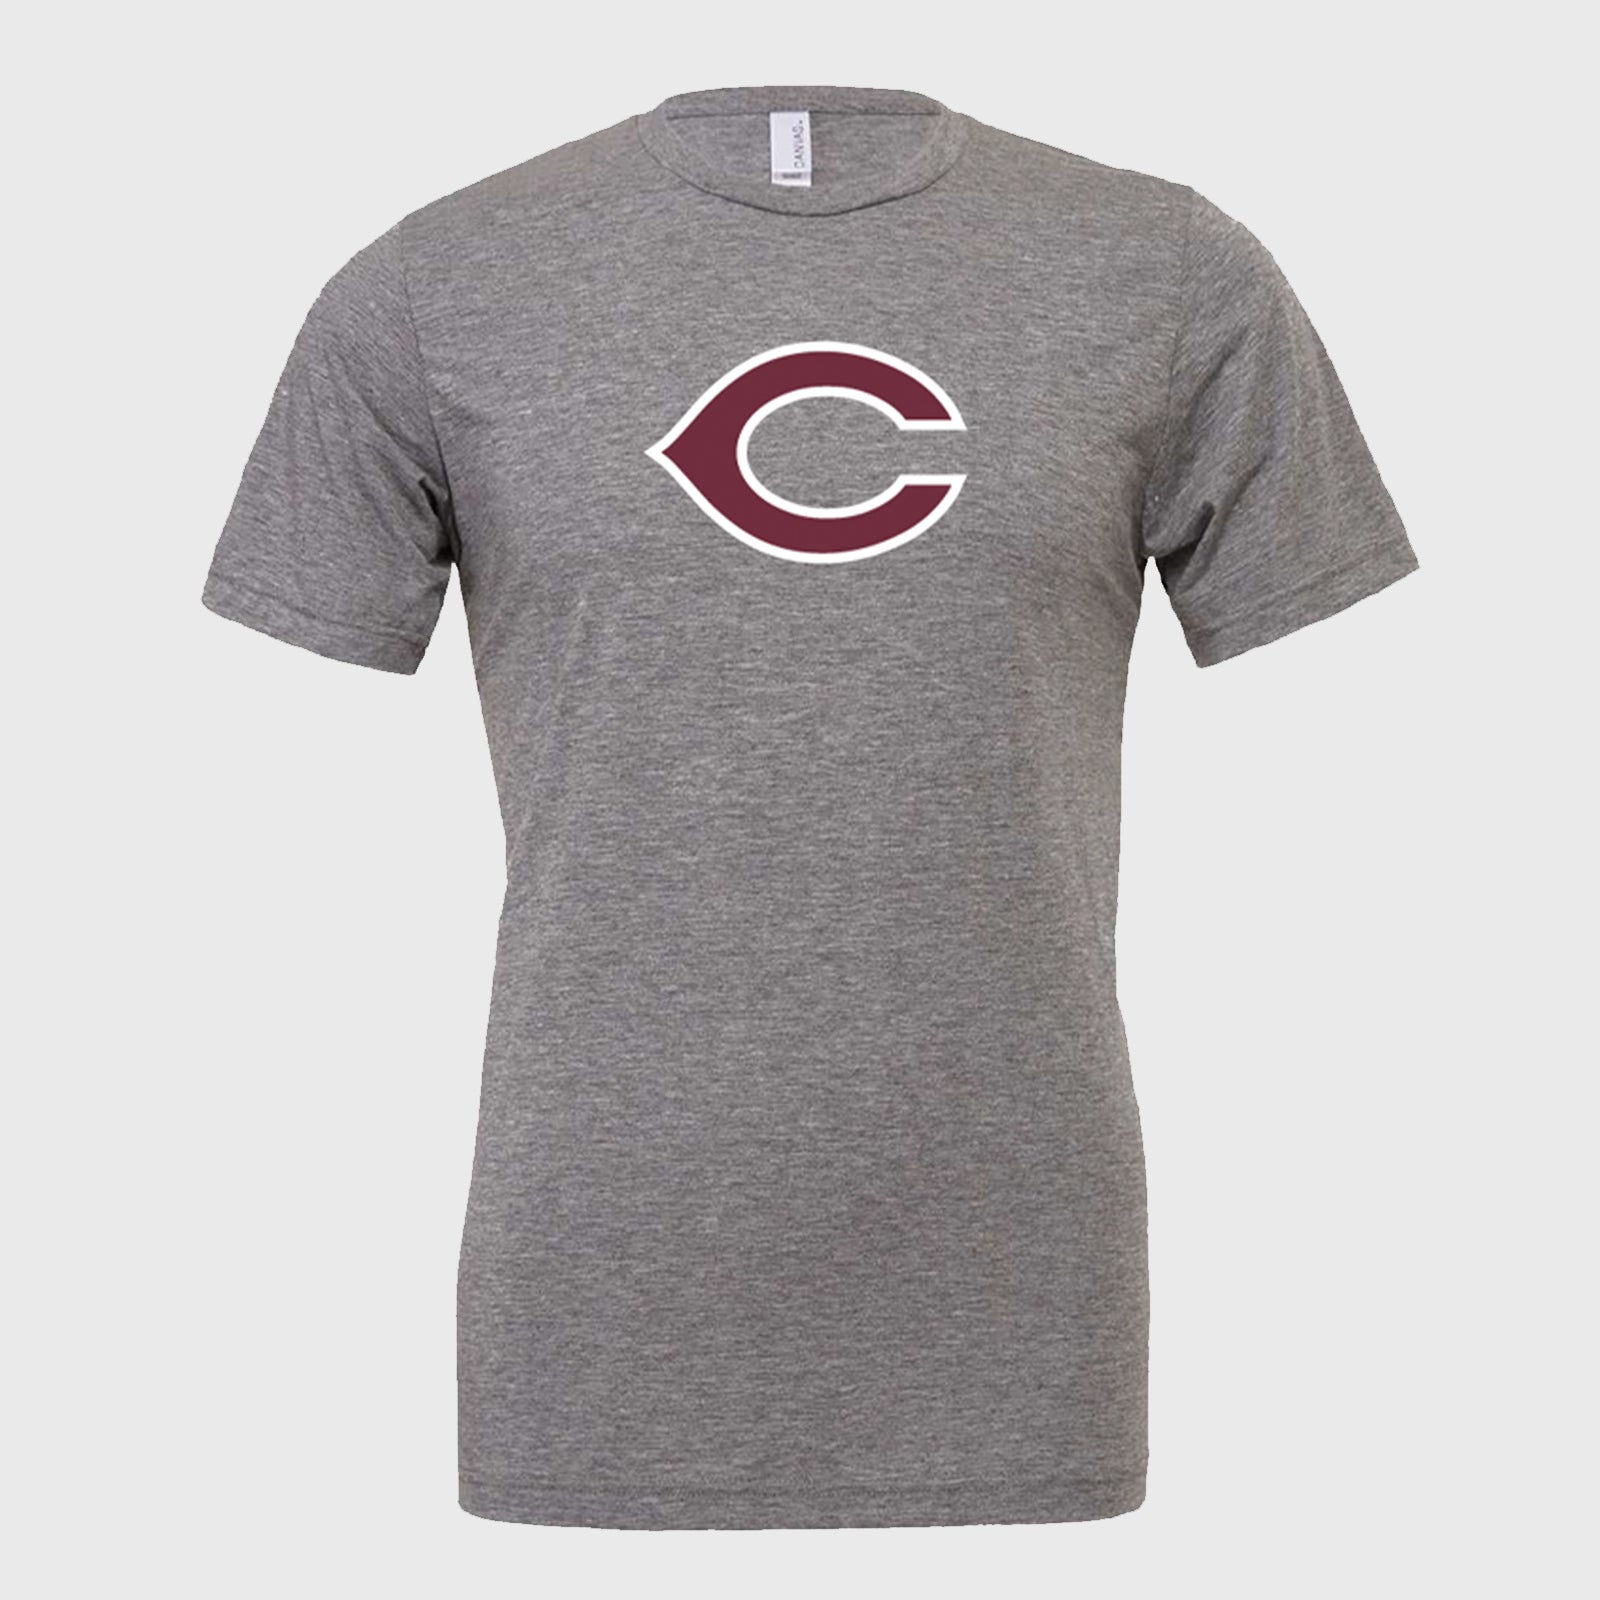 Collierville "C" Outline Tee